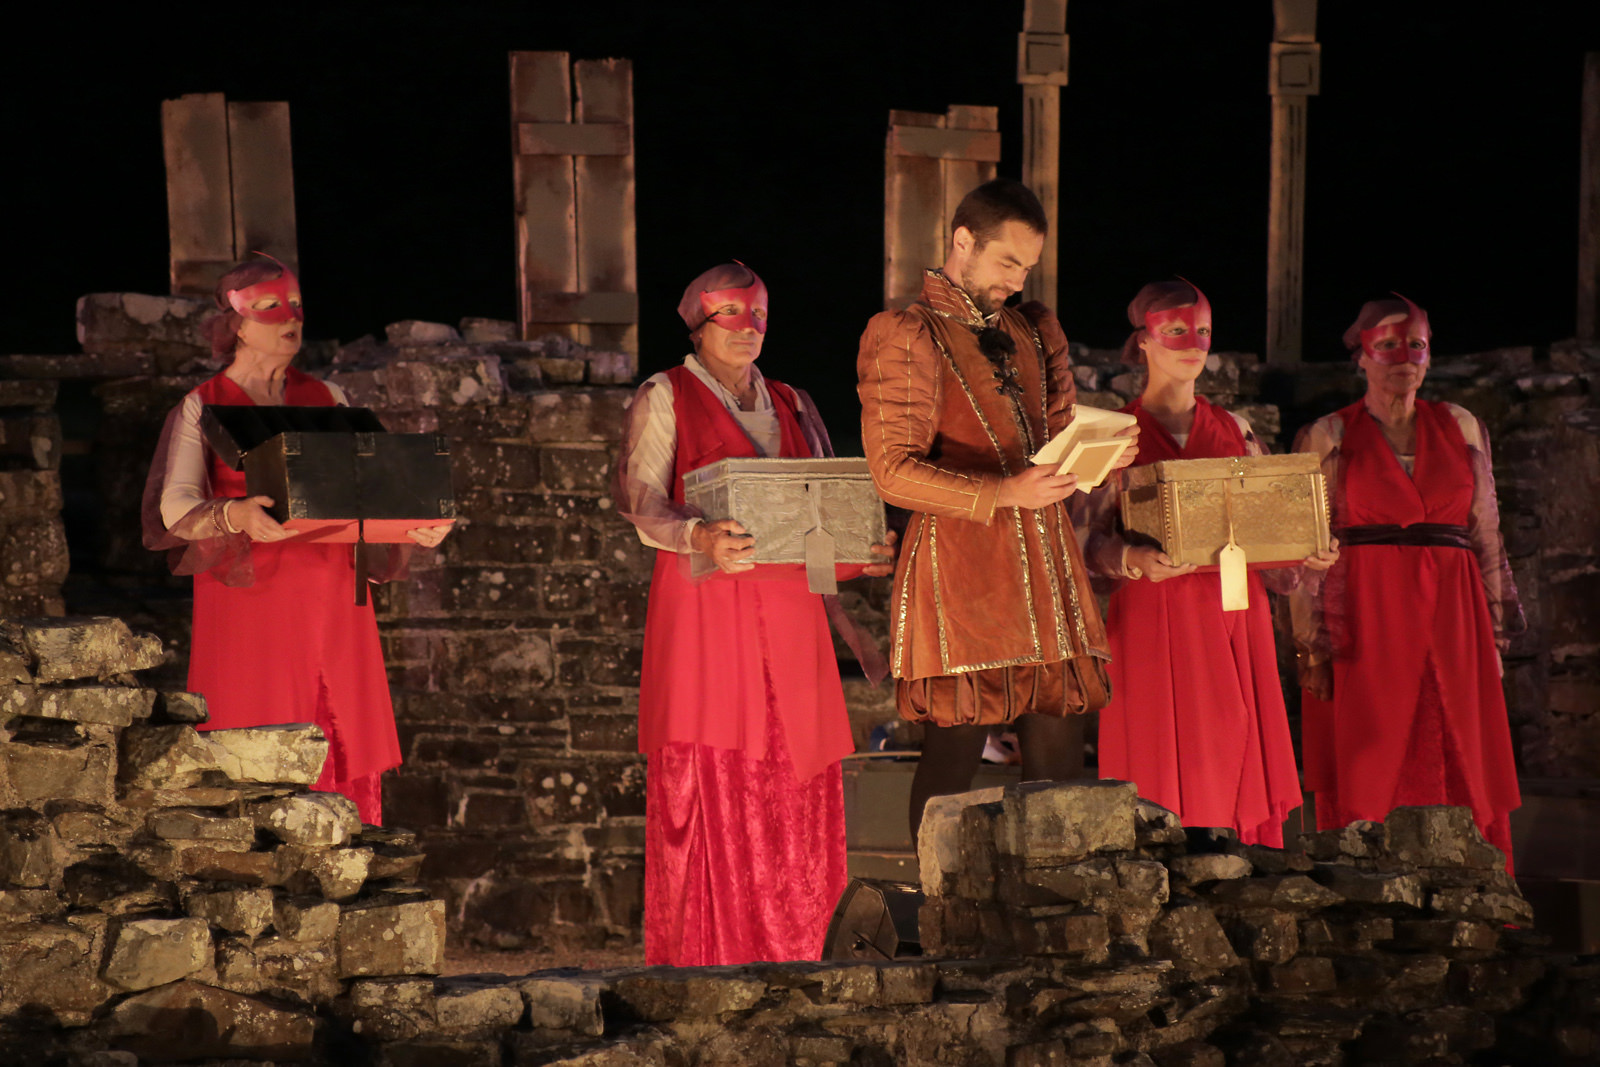 Bassanio reads the note from a casket